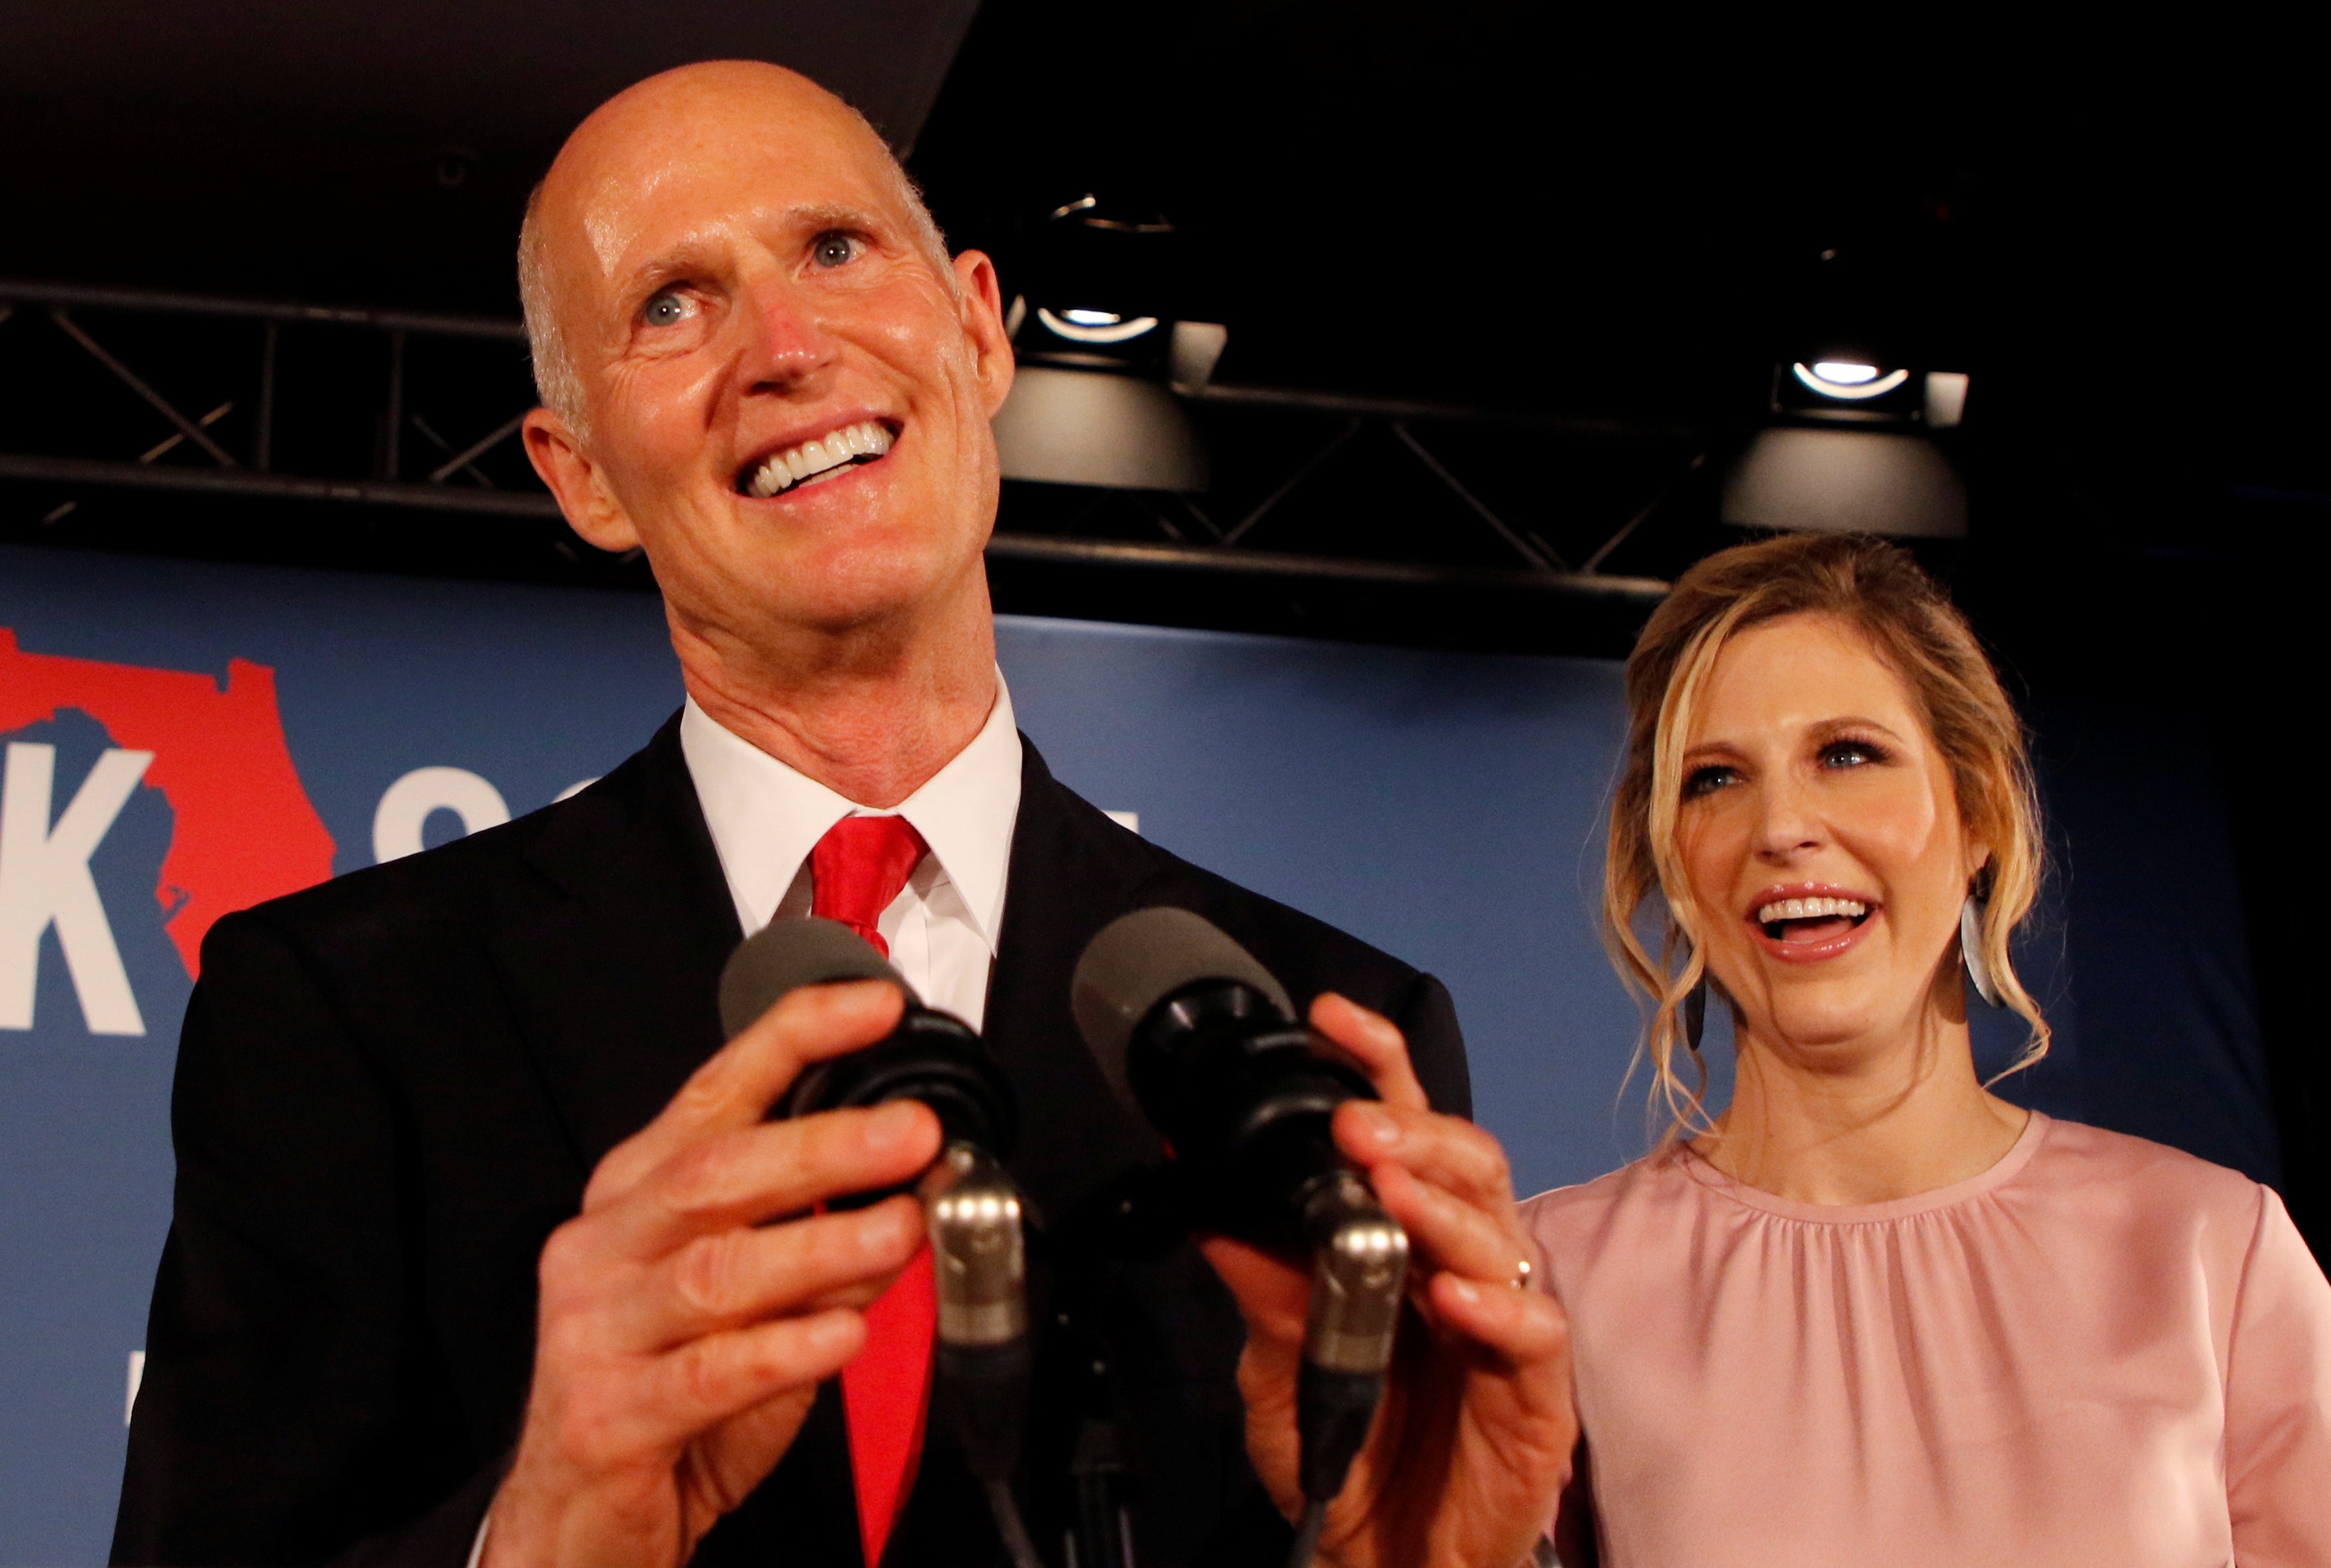 Rick Scott accompanied by his daughter Allison Guimard as he addresses supporters at his midterm election night party in Naples, Florida. Photo: Reuters